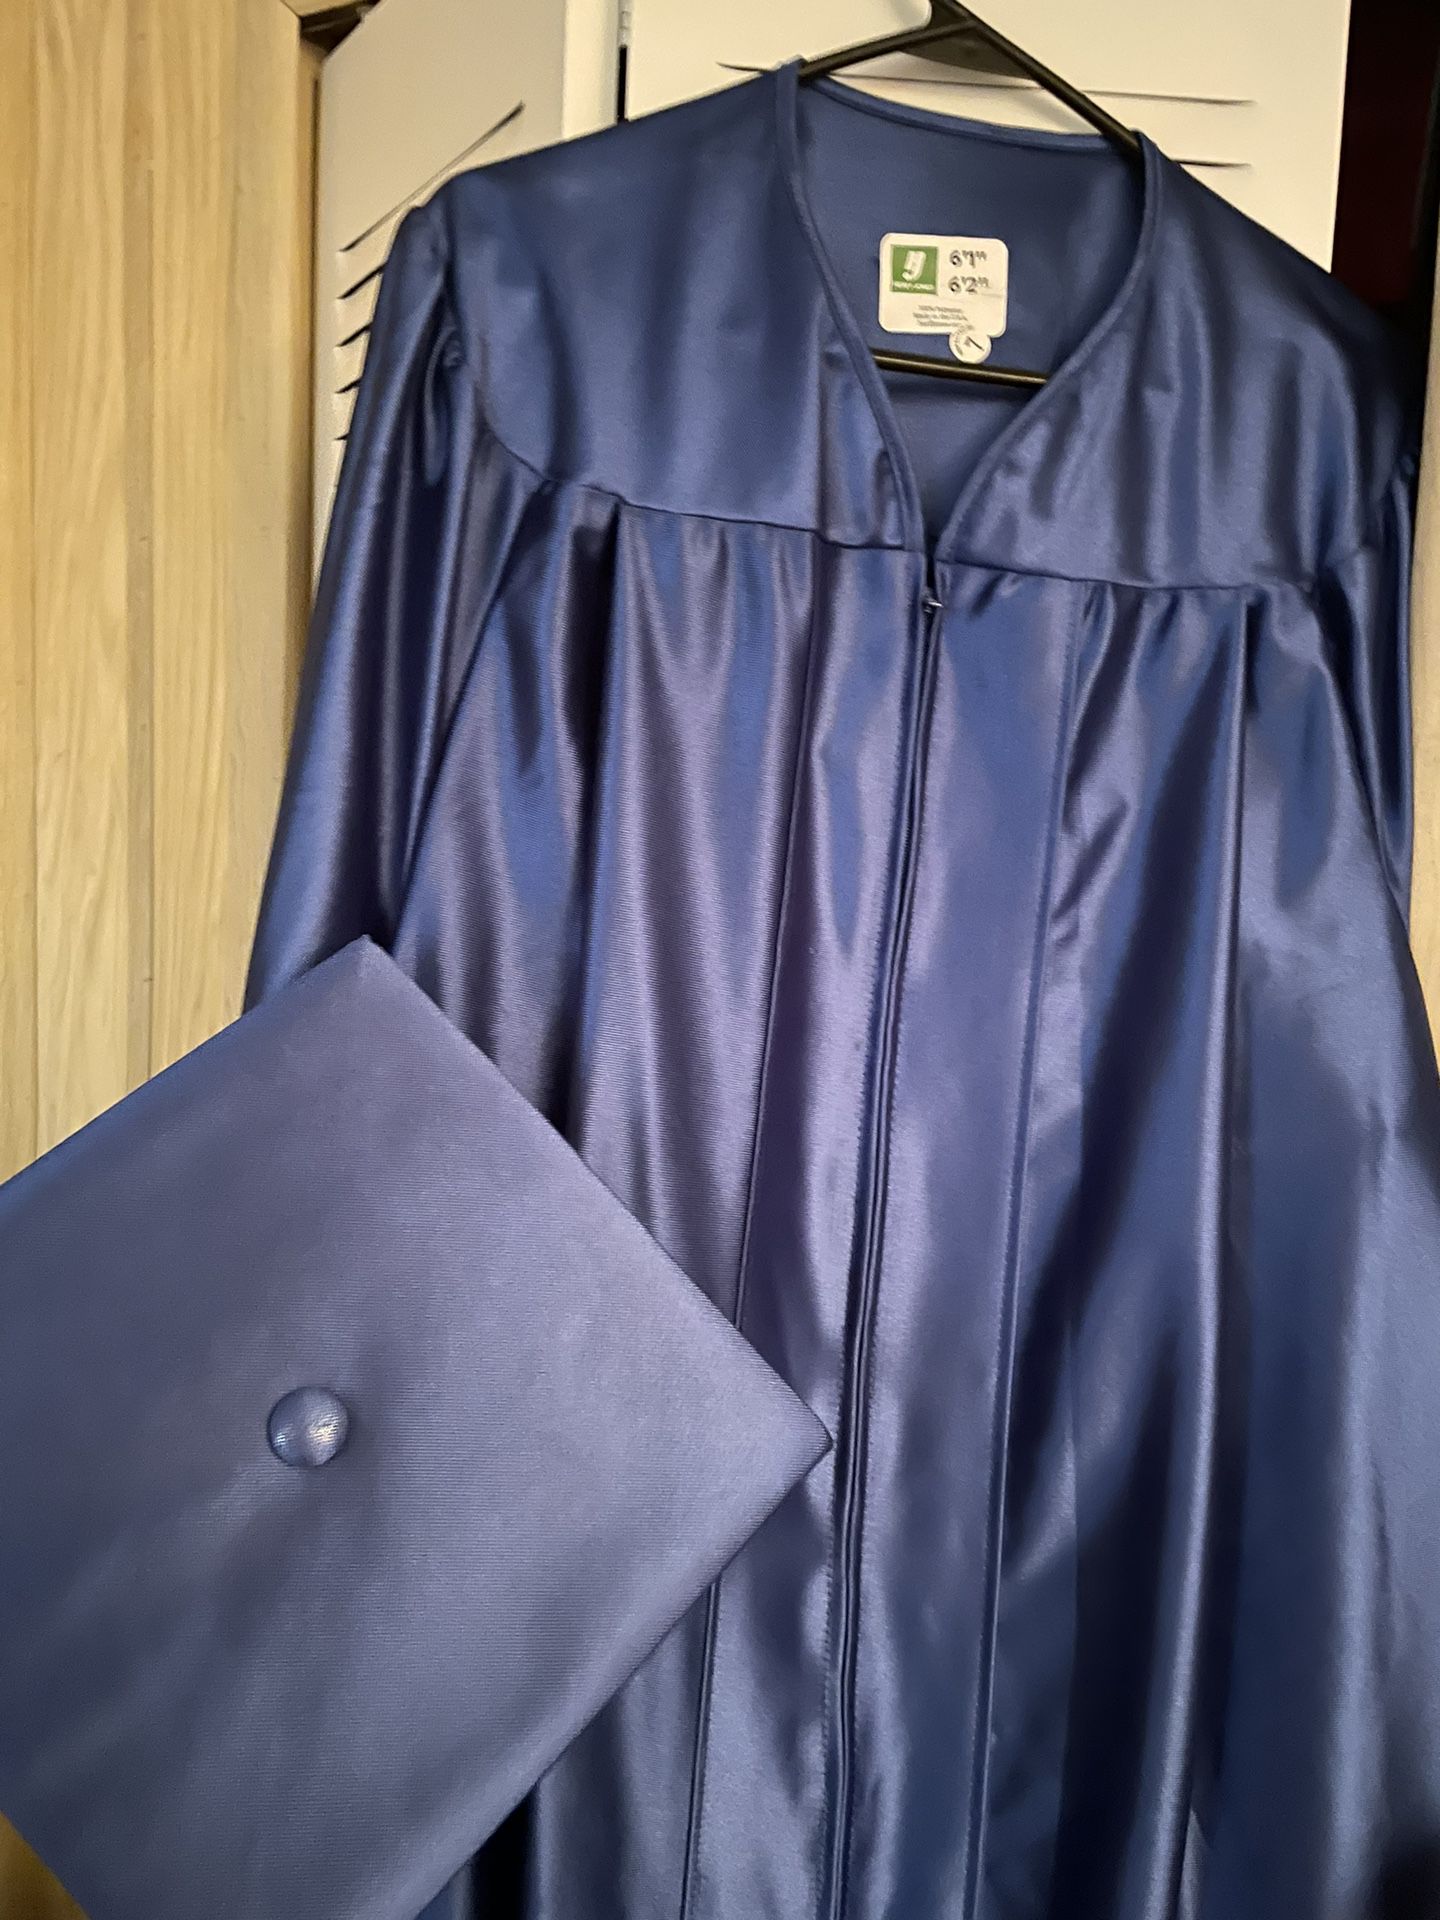 Mens Cap and Gown